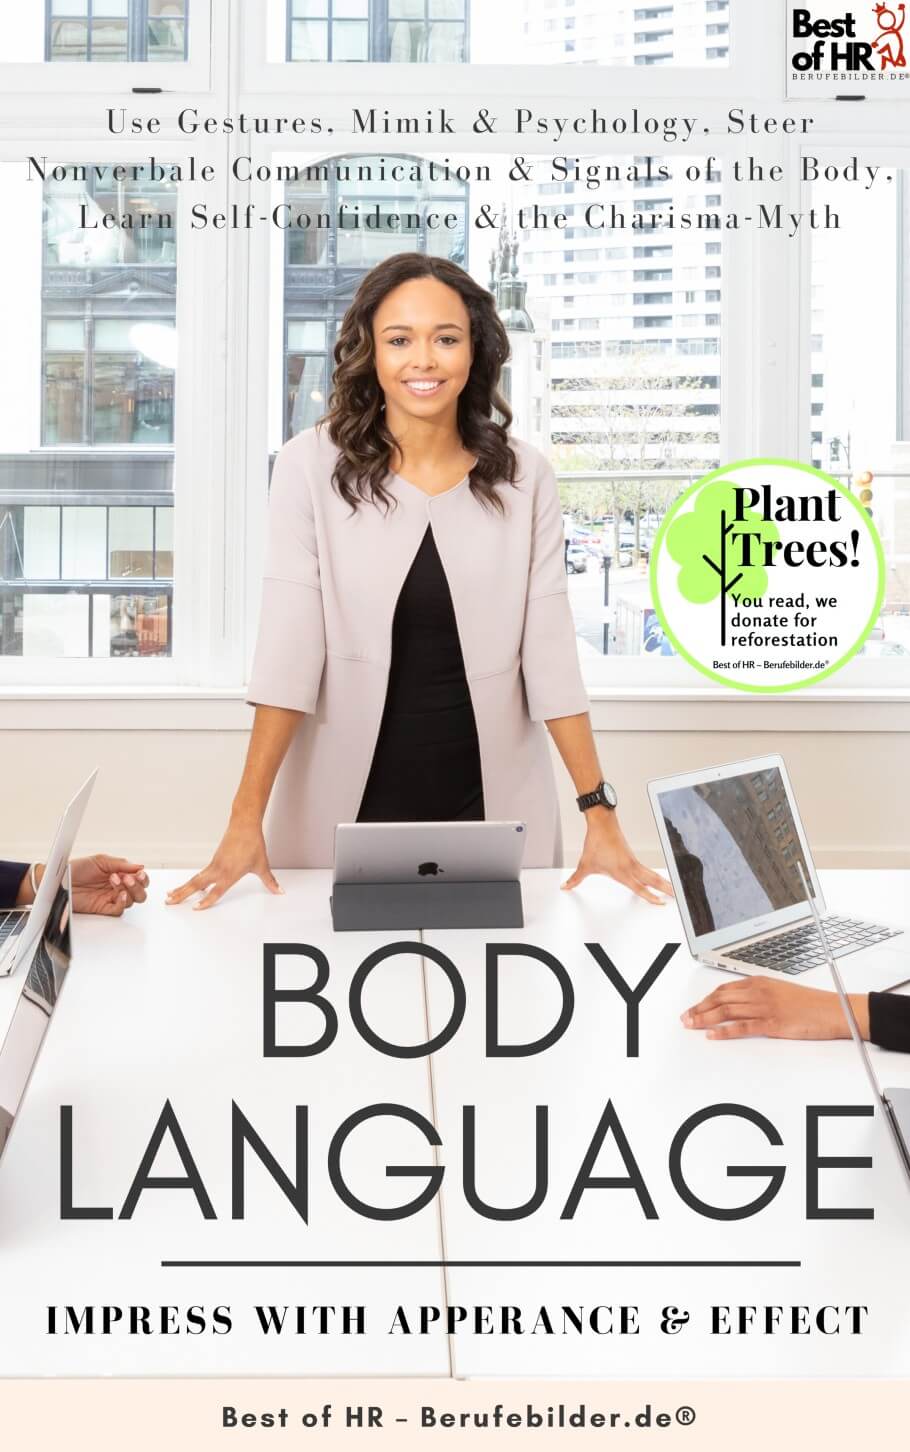 Body Language – Impress with Apperance & Effect (Engl. Version)